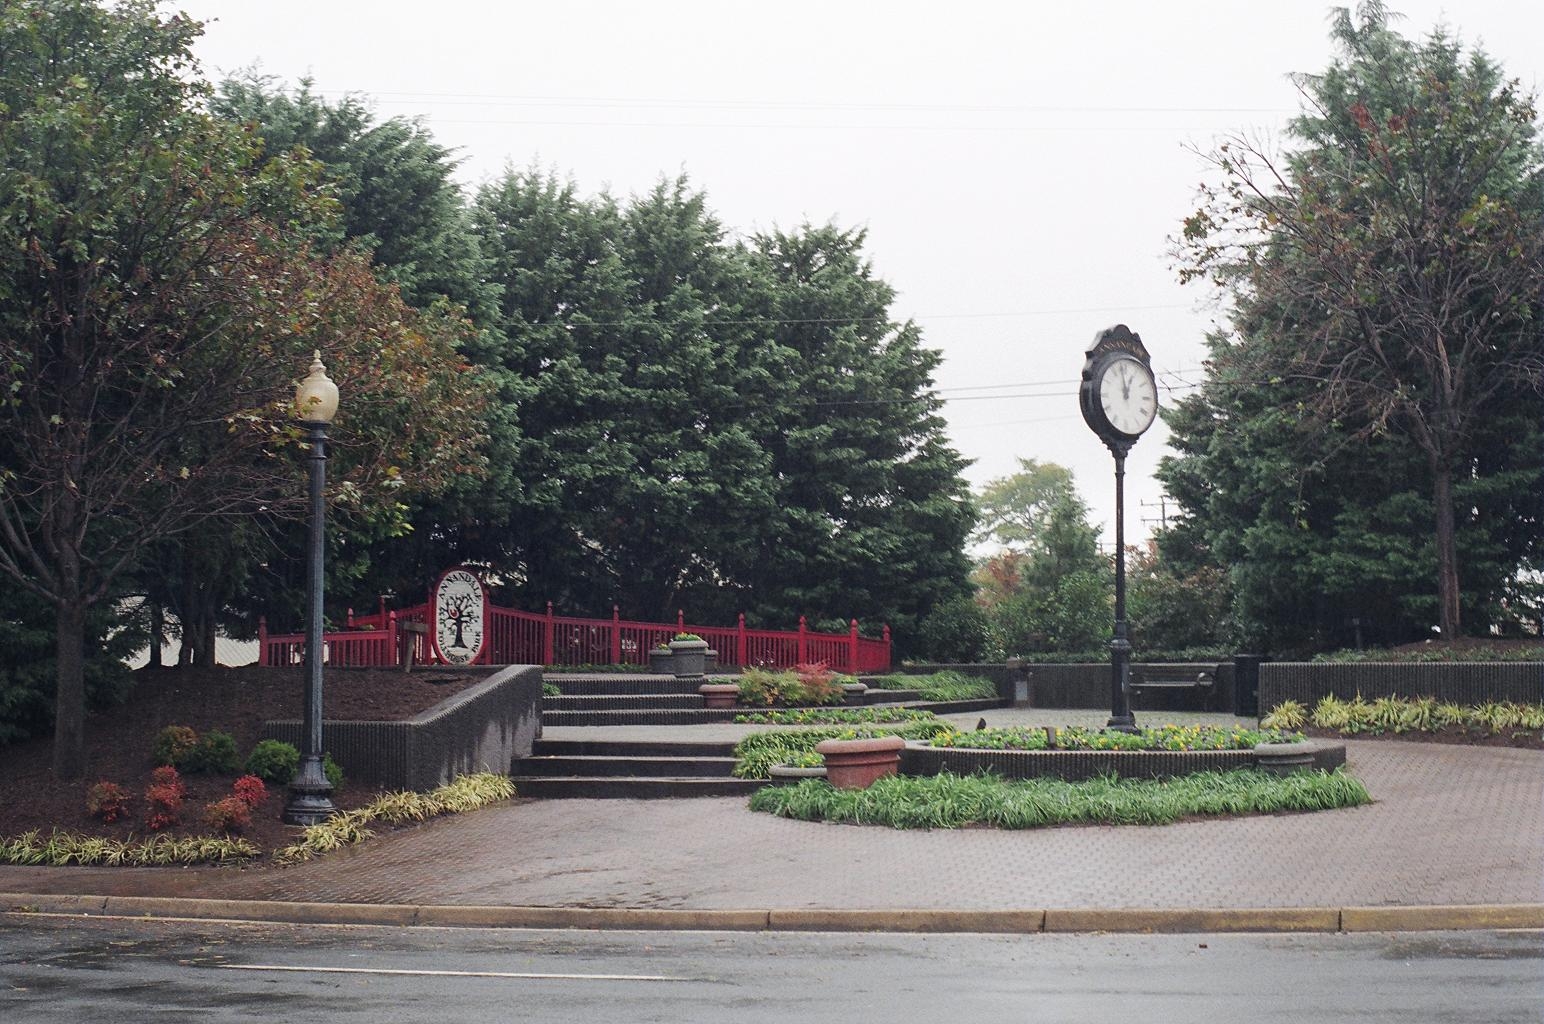 Toll House Park is the only Pocket Park currently in Annandale.